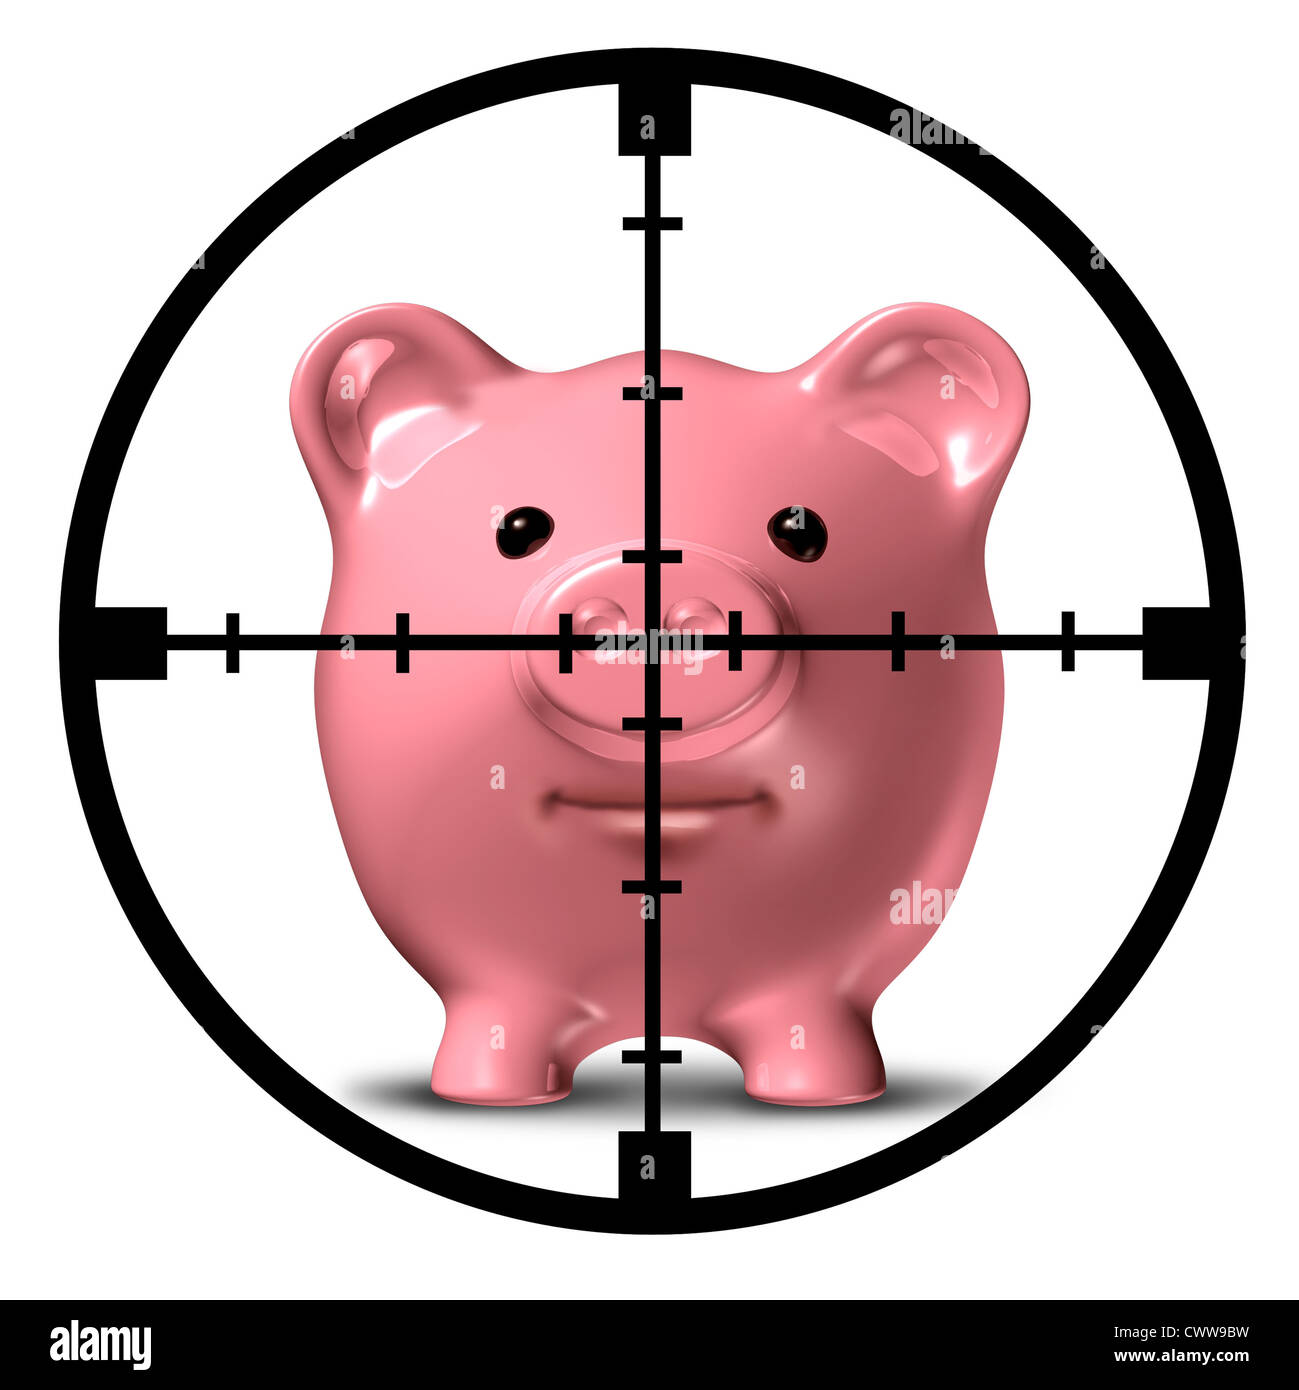 Hunting for specials and aim to save symbol of finance represented by a pink piggy bank with an aiming weapon crosshair representing the safest and most profitable economic strategies for business and home. Stock Photo